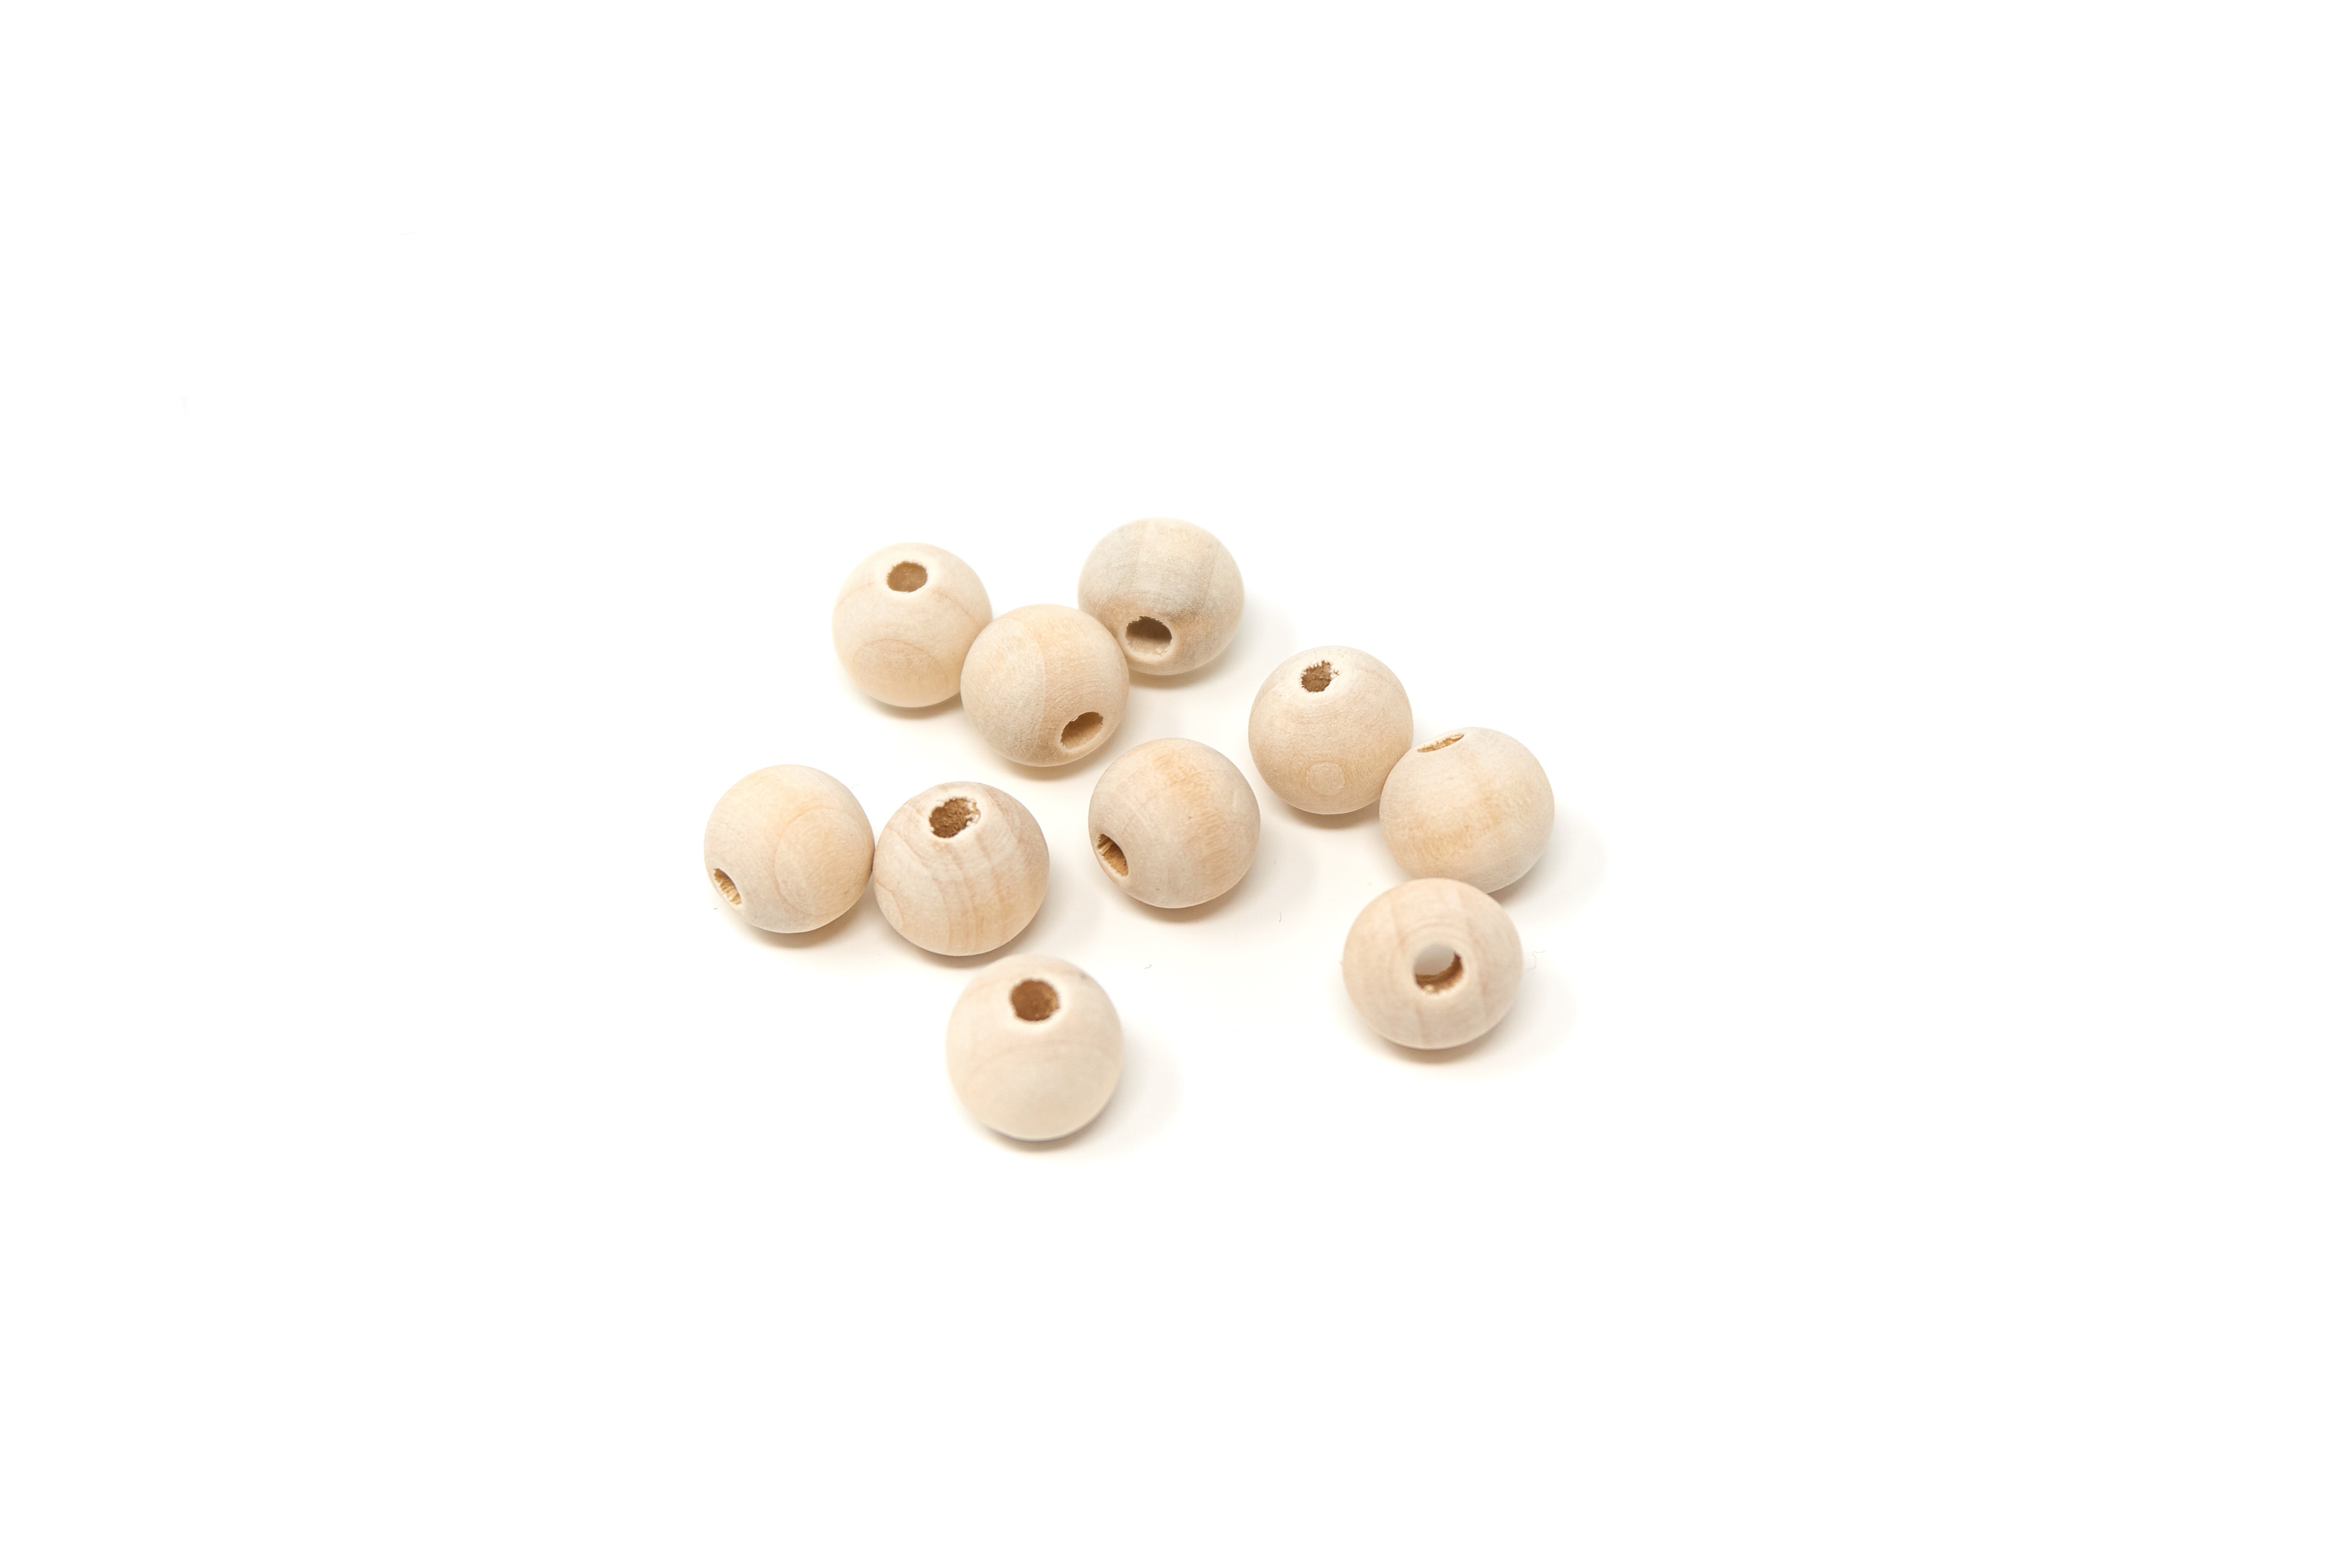 Natural Round Wood Beads 12mm 50 pieces - Cameos Art Shop